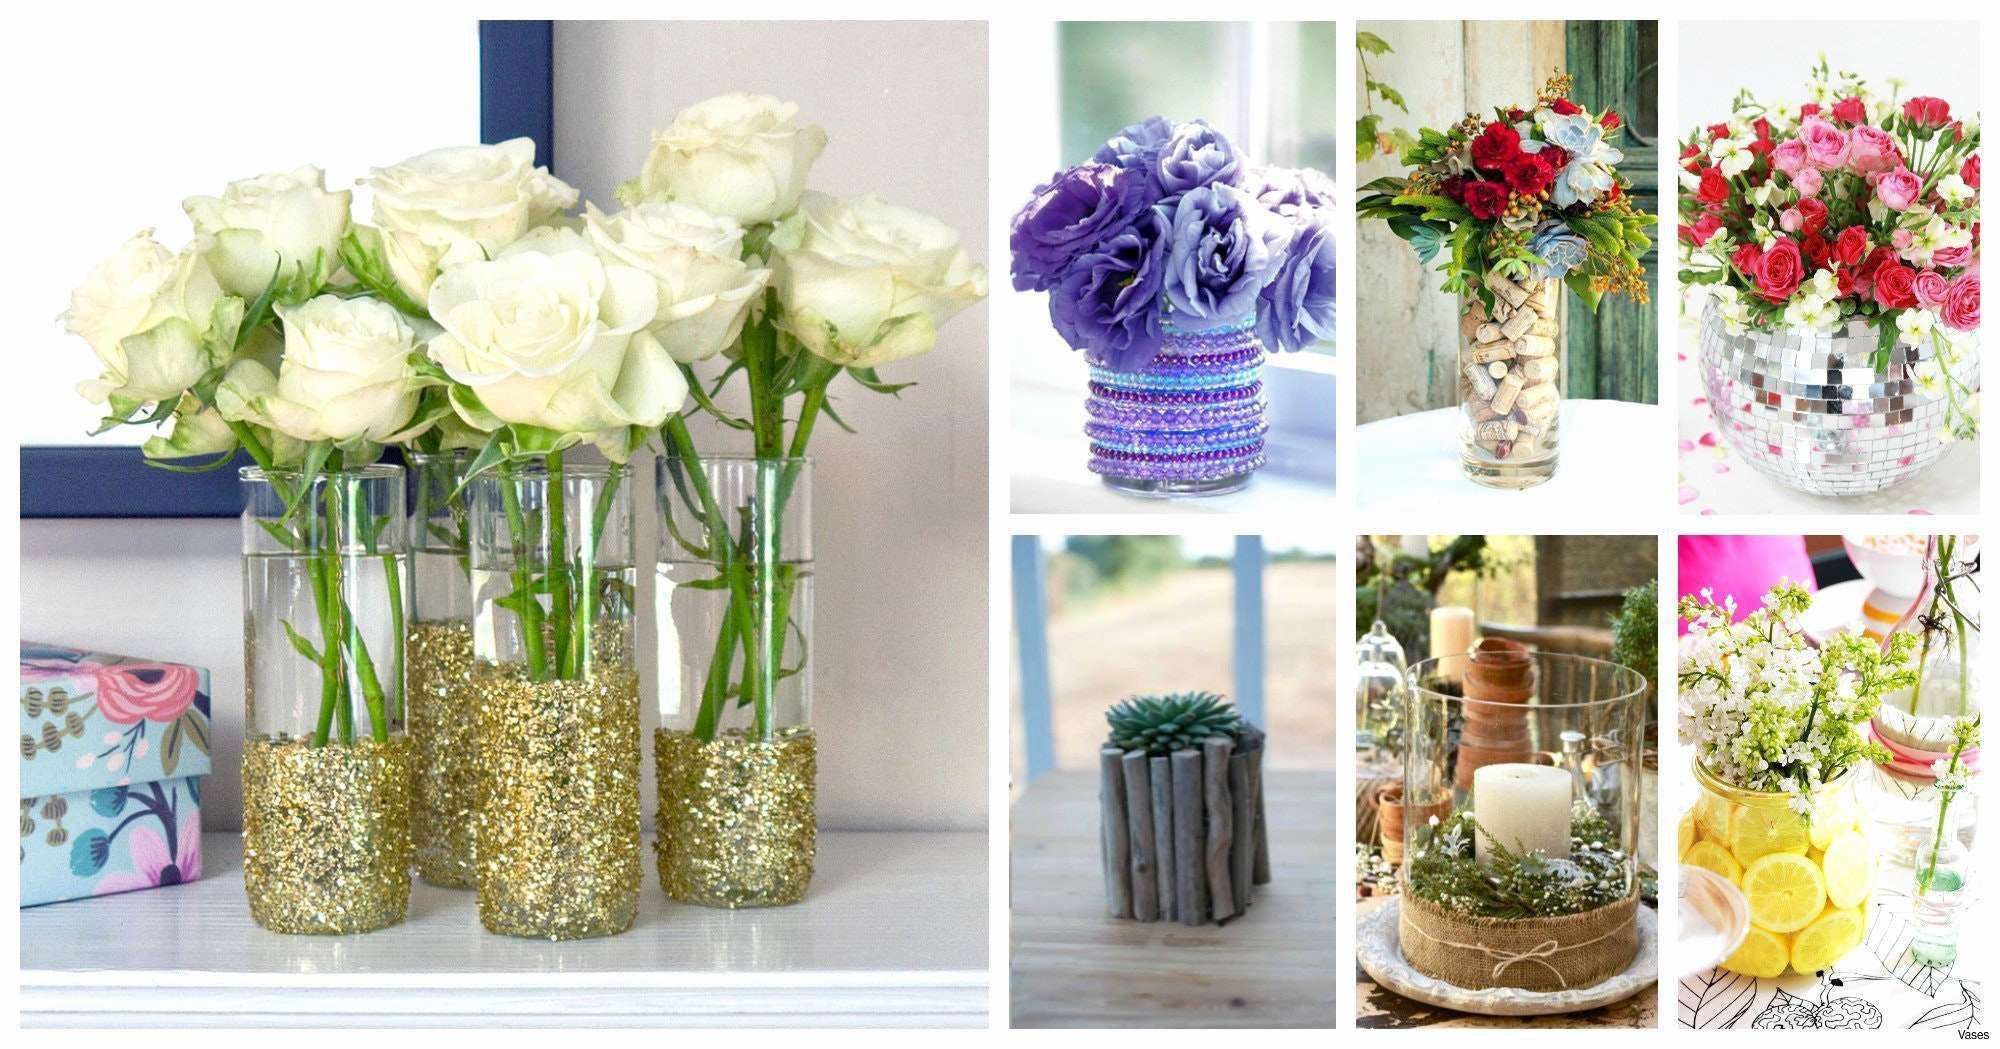 10 Trendy Bulk Vases Dollar Tree 2023 free download bulk vases dollar tree of glass vases bulk awesome 31 unique vases cheap the weekly world pertaining to glass vases bulk awesome 31 unique vases cheap